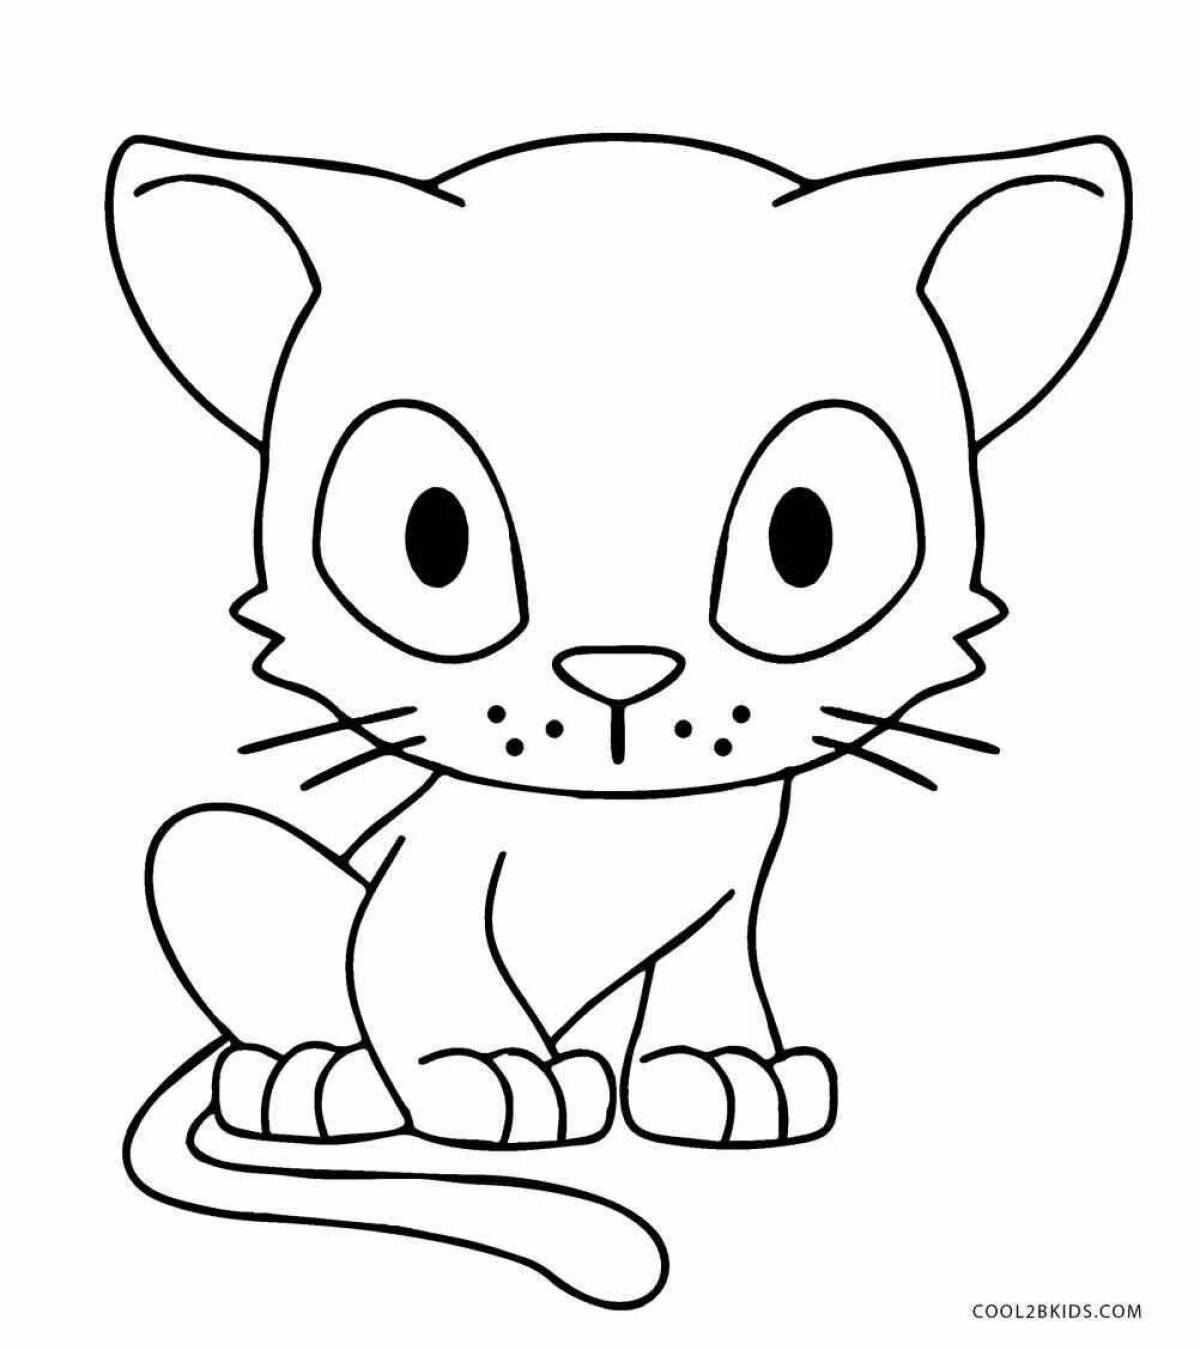 Bright anime cat coloring book